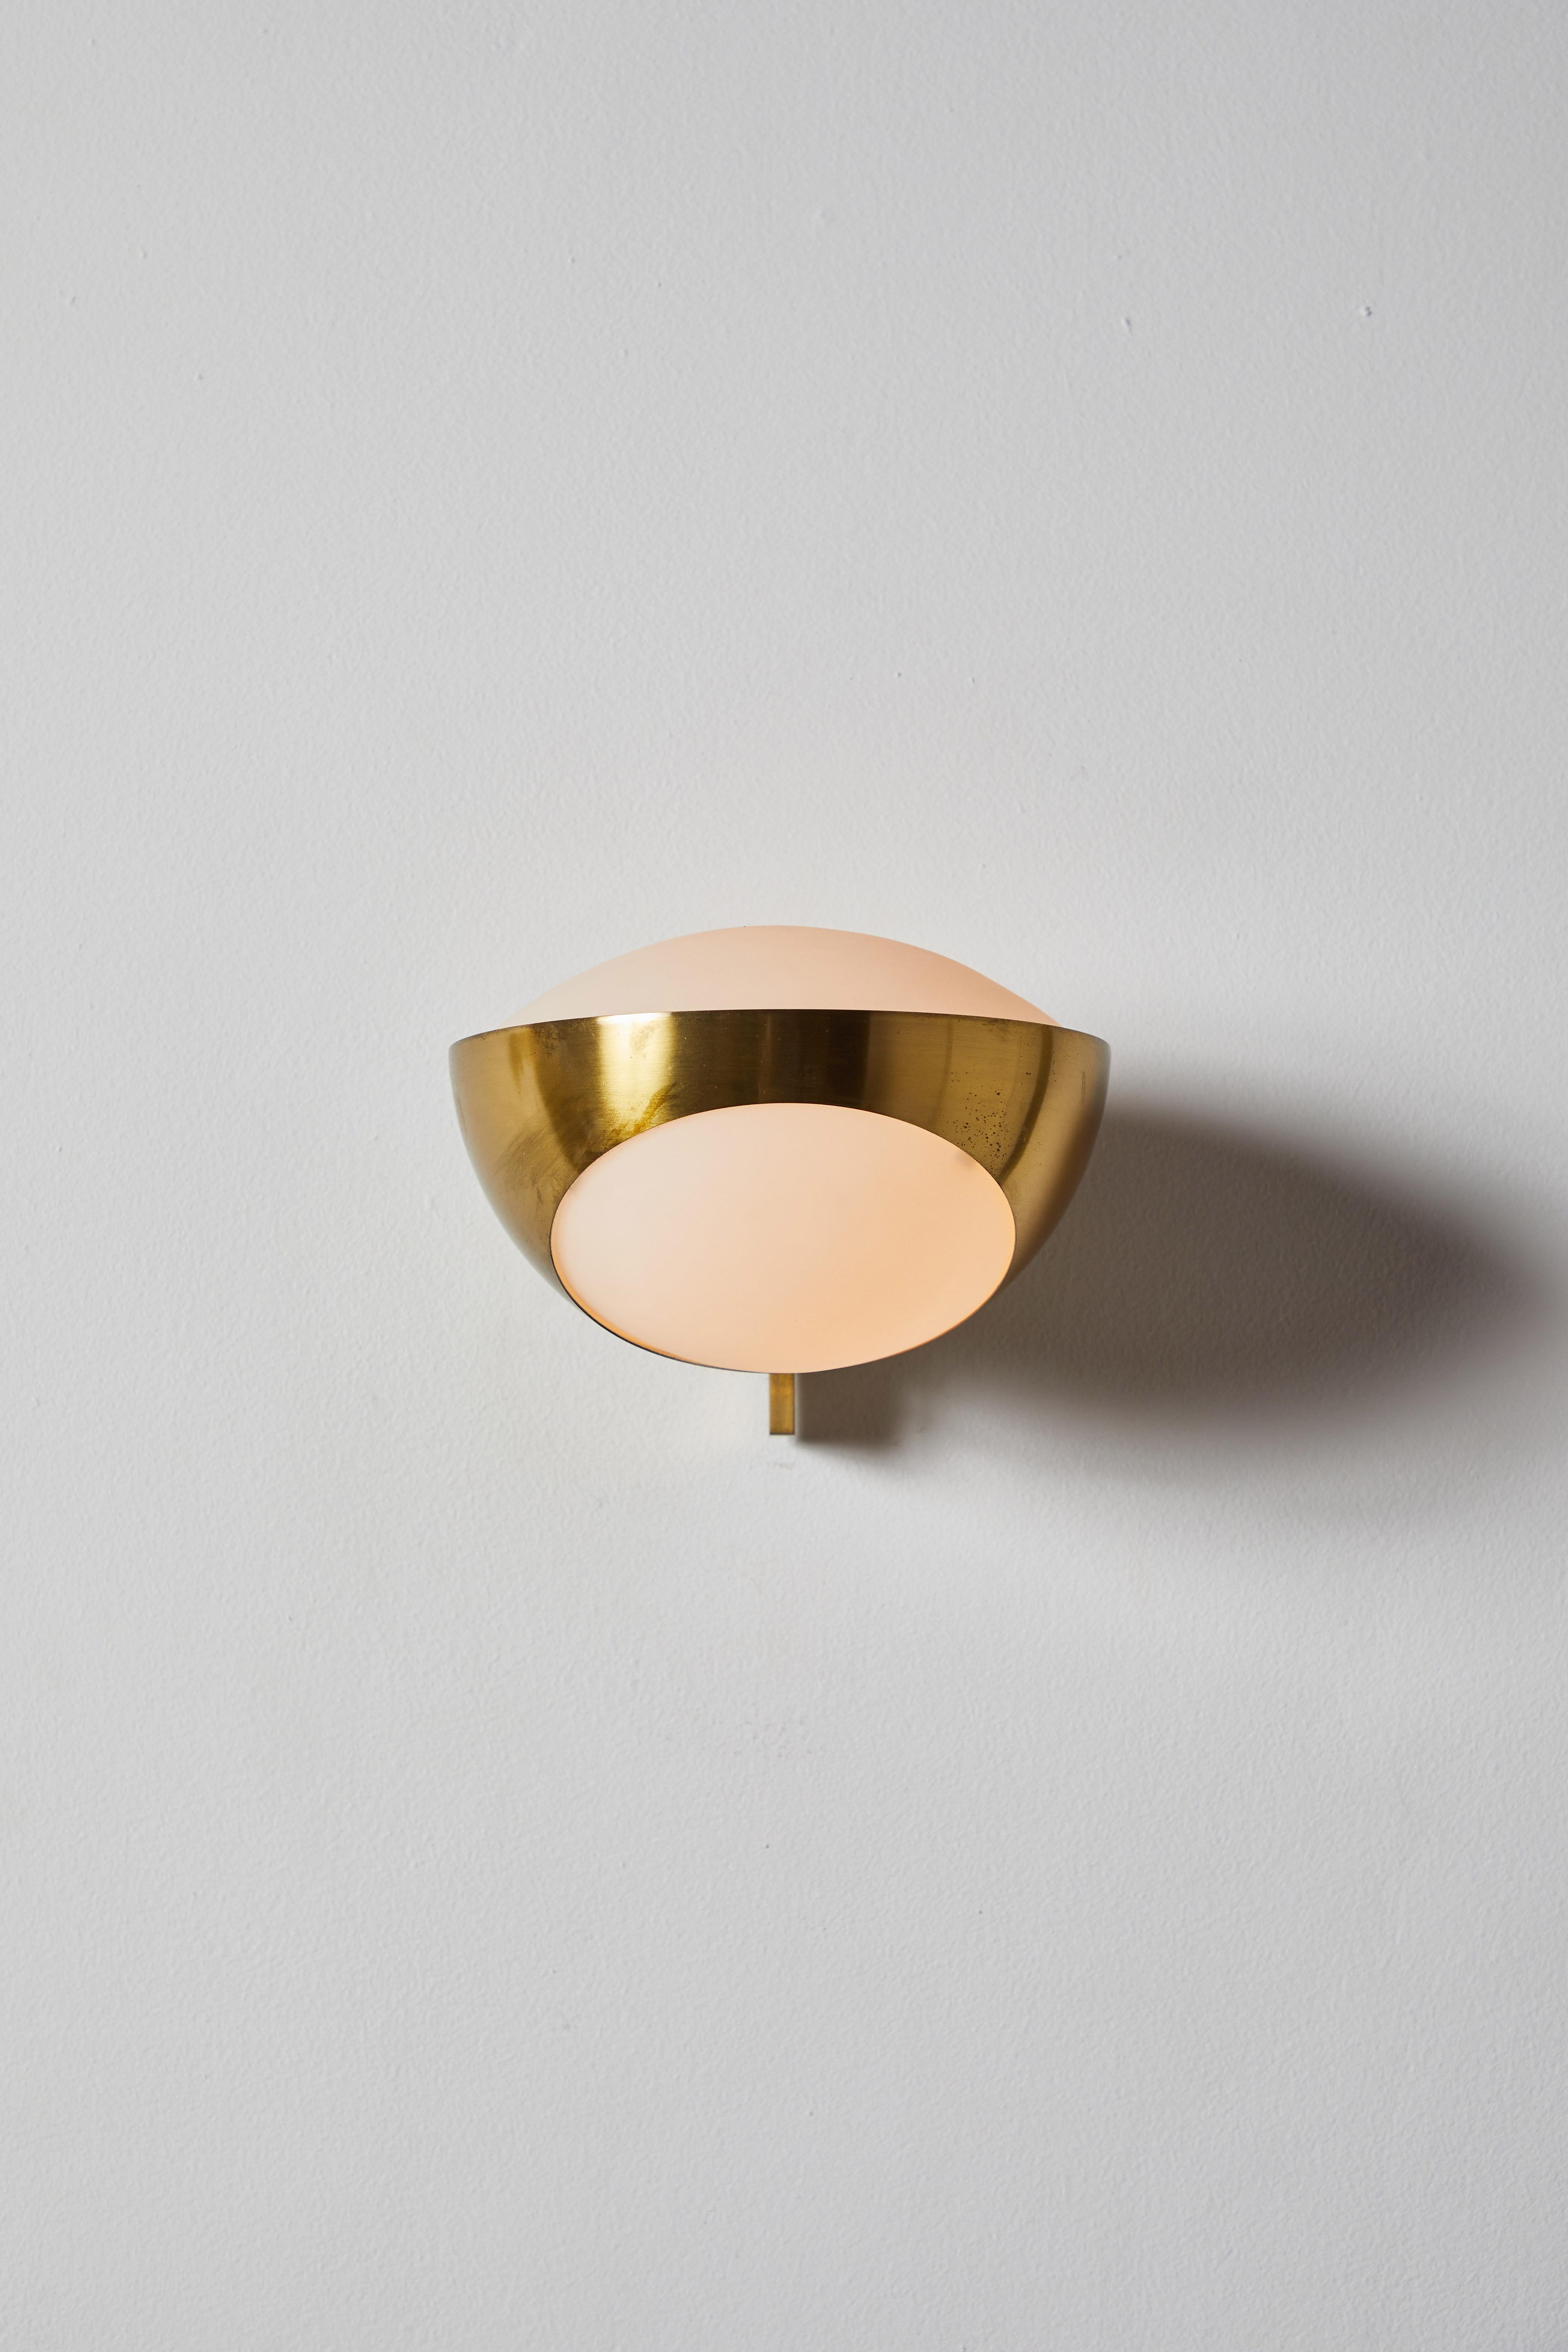 Single model no. 1963 sconce by Max Ingrand for Fontanta Arte. Designed and manufactured in Italy, 1960. Brushed satin glass diffuser, brass armature. Custom brass backplates. Light takes one E27 60w maximum bulb. Bulbs are provided as a one-time